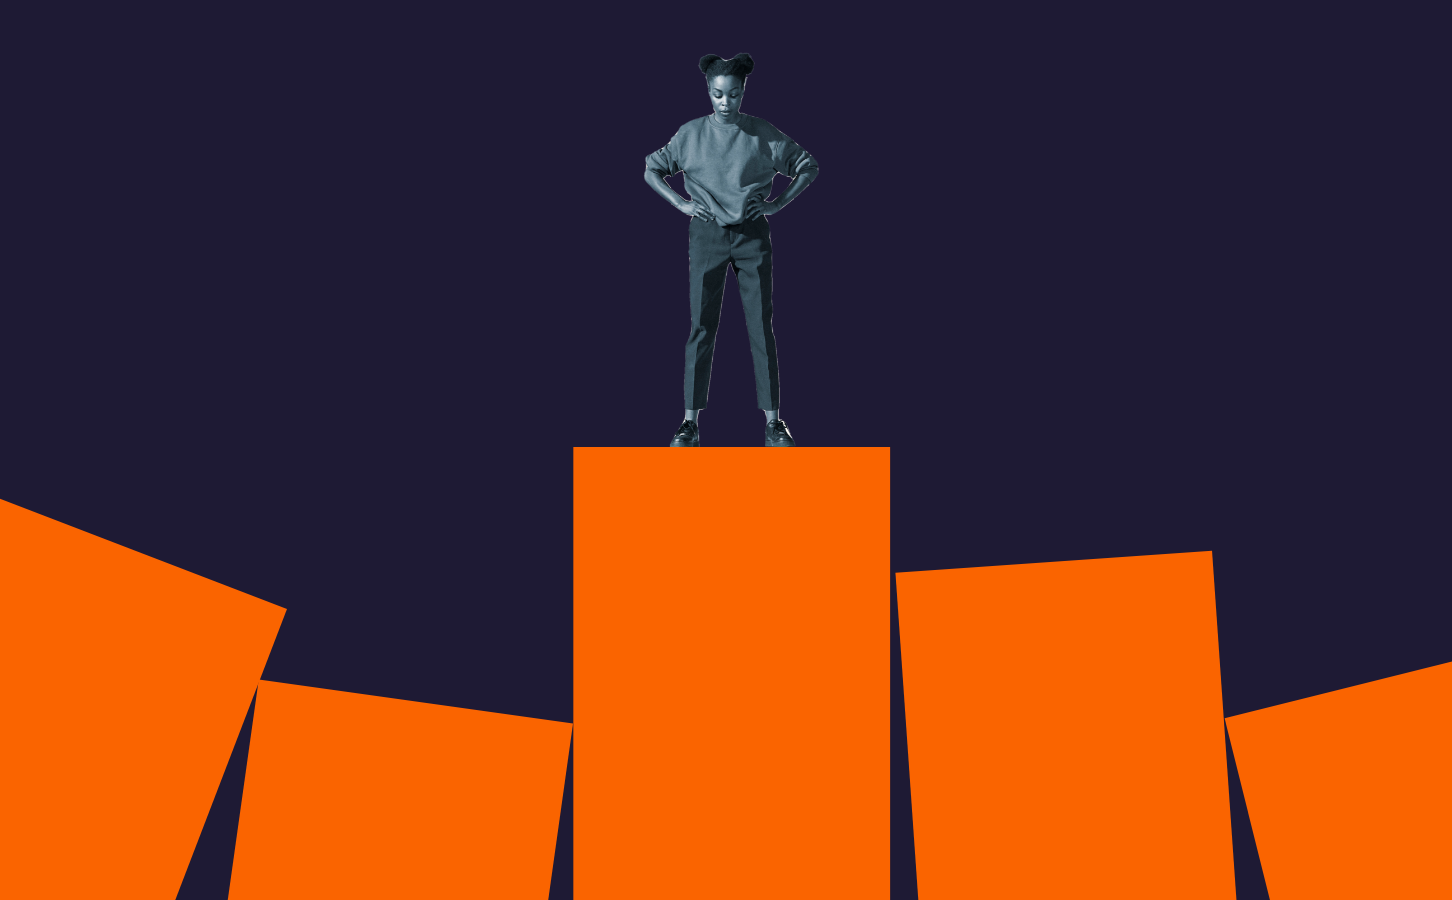 Woman proudly standing on top of the leaning bars she climbed over to accomplish her goals. Image is set in a dark navy monotone color scheme.